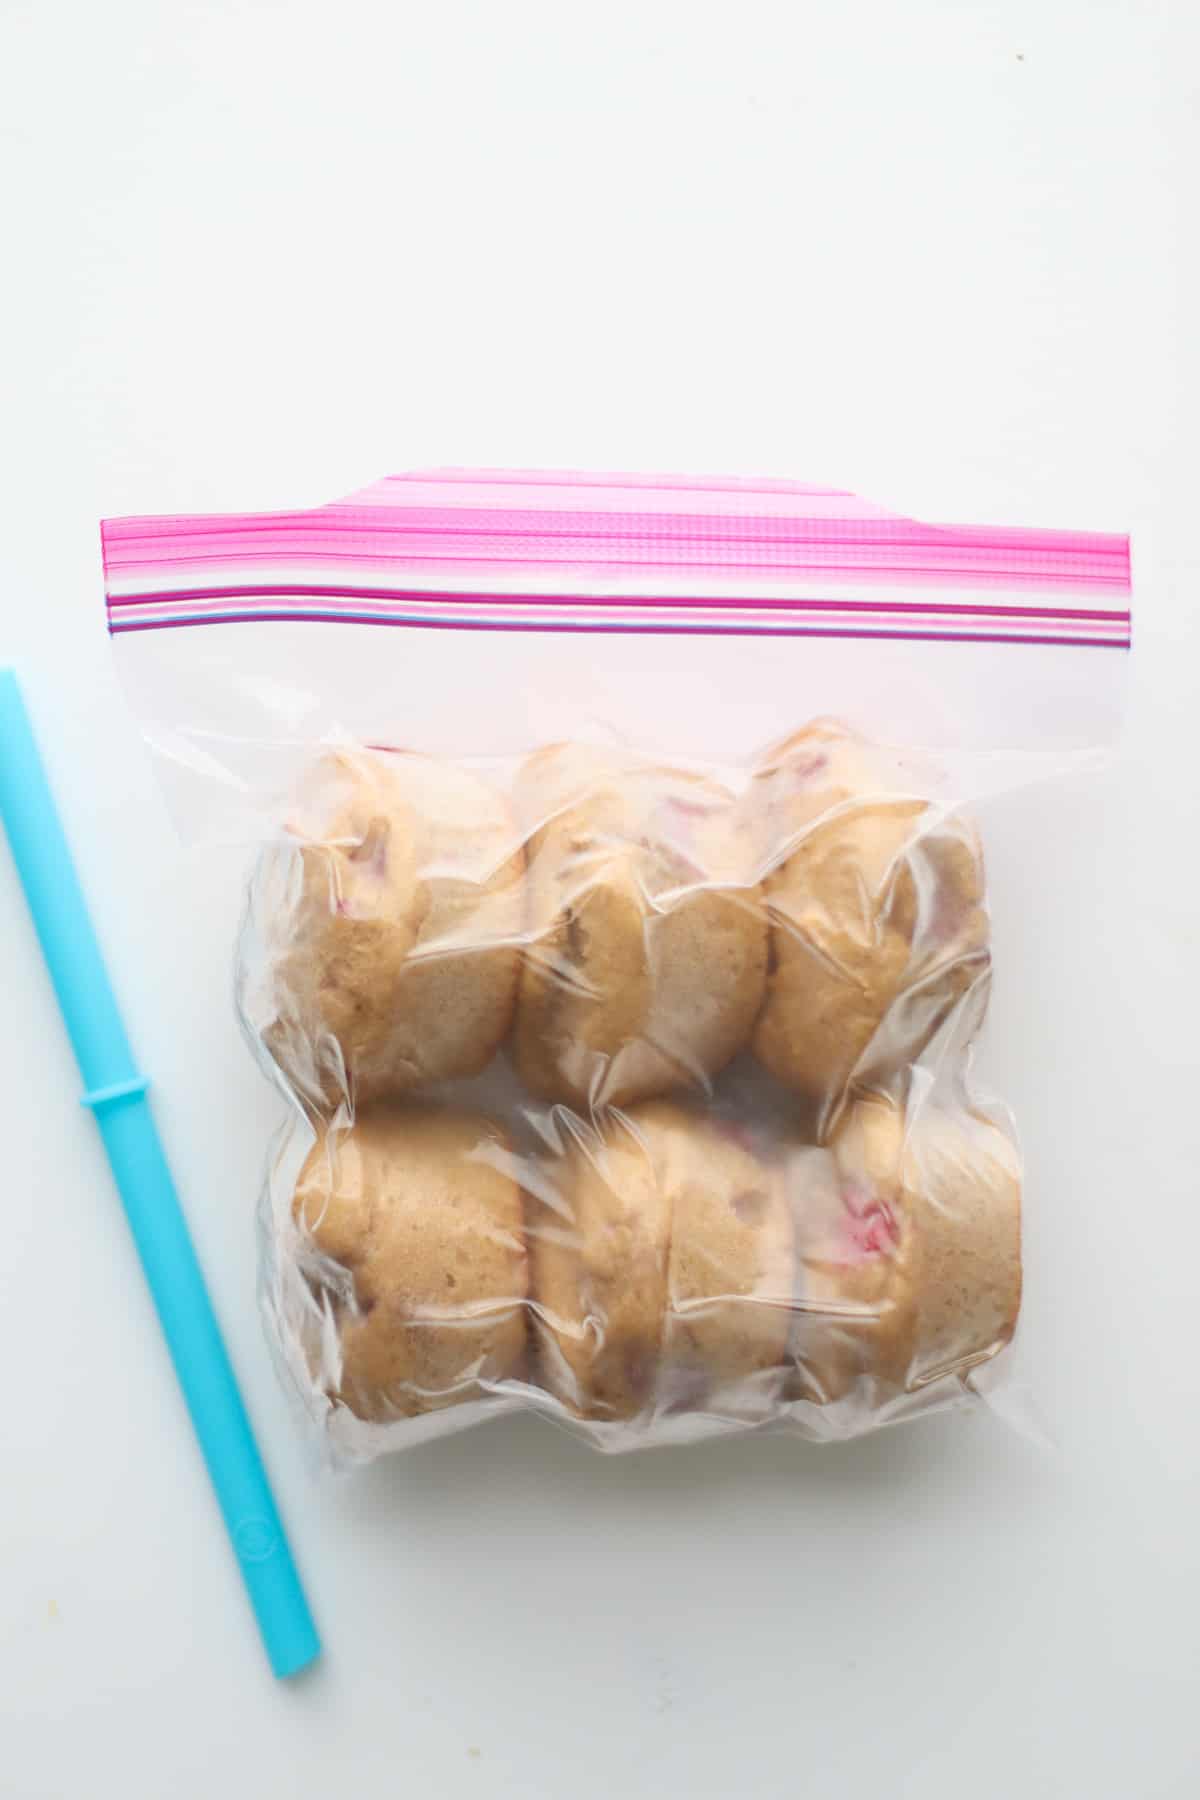 Six muffins in plastic bag with air sucked out with straw.